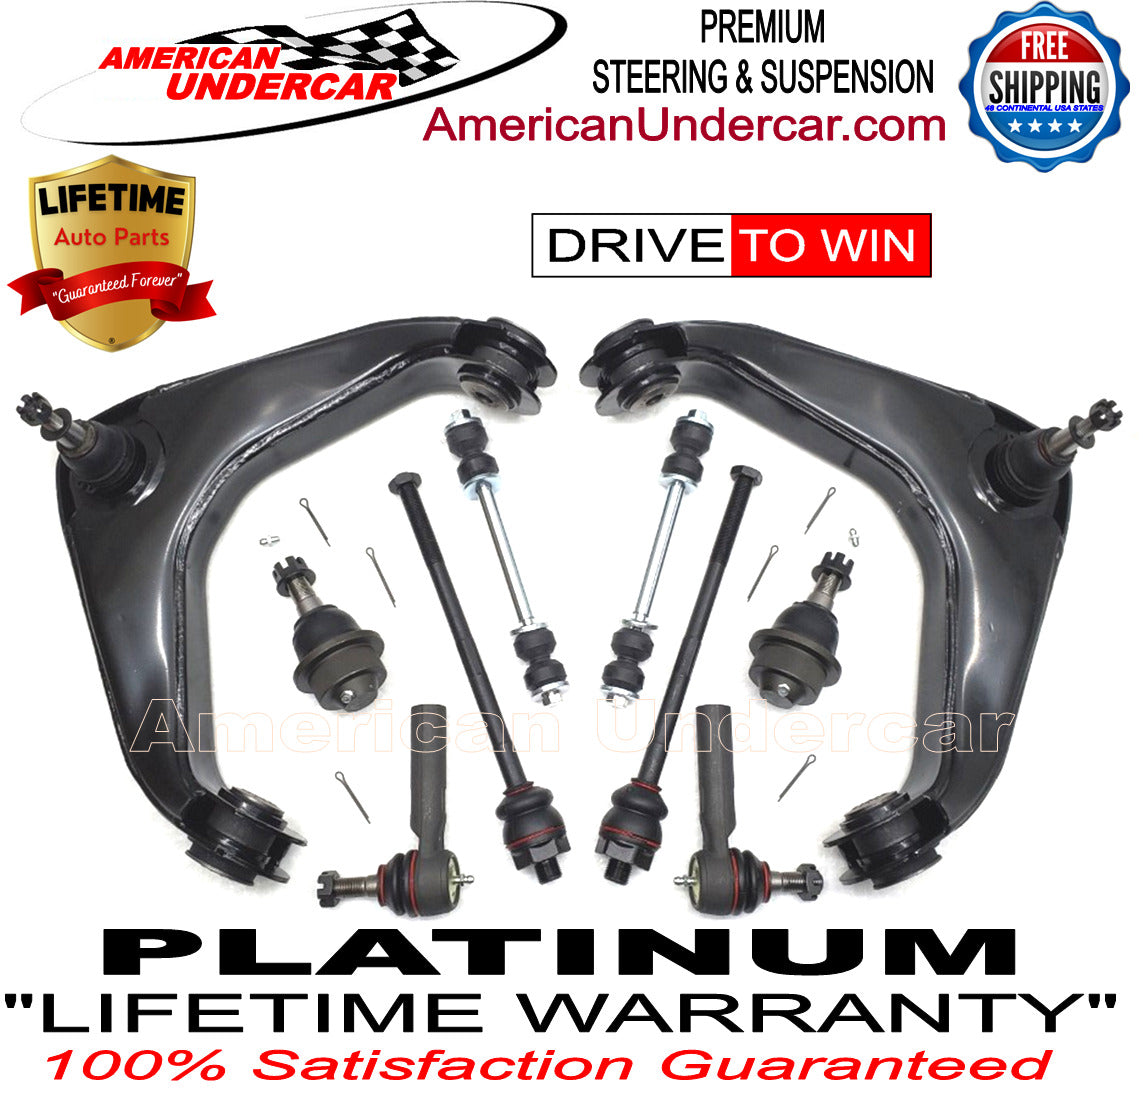 Lifetime Steering and Suspension Kit for 2001-2010 Chevrolet Silverado 2500HD 4x4